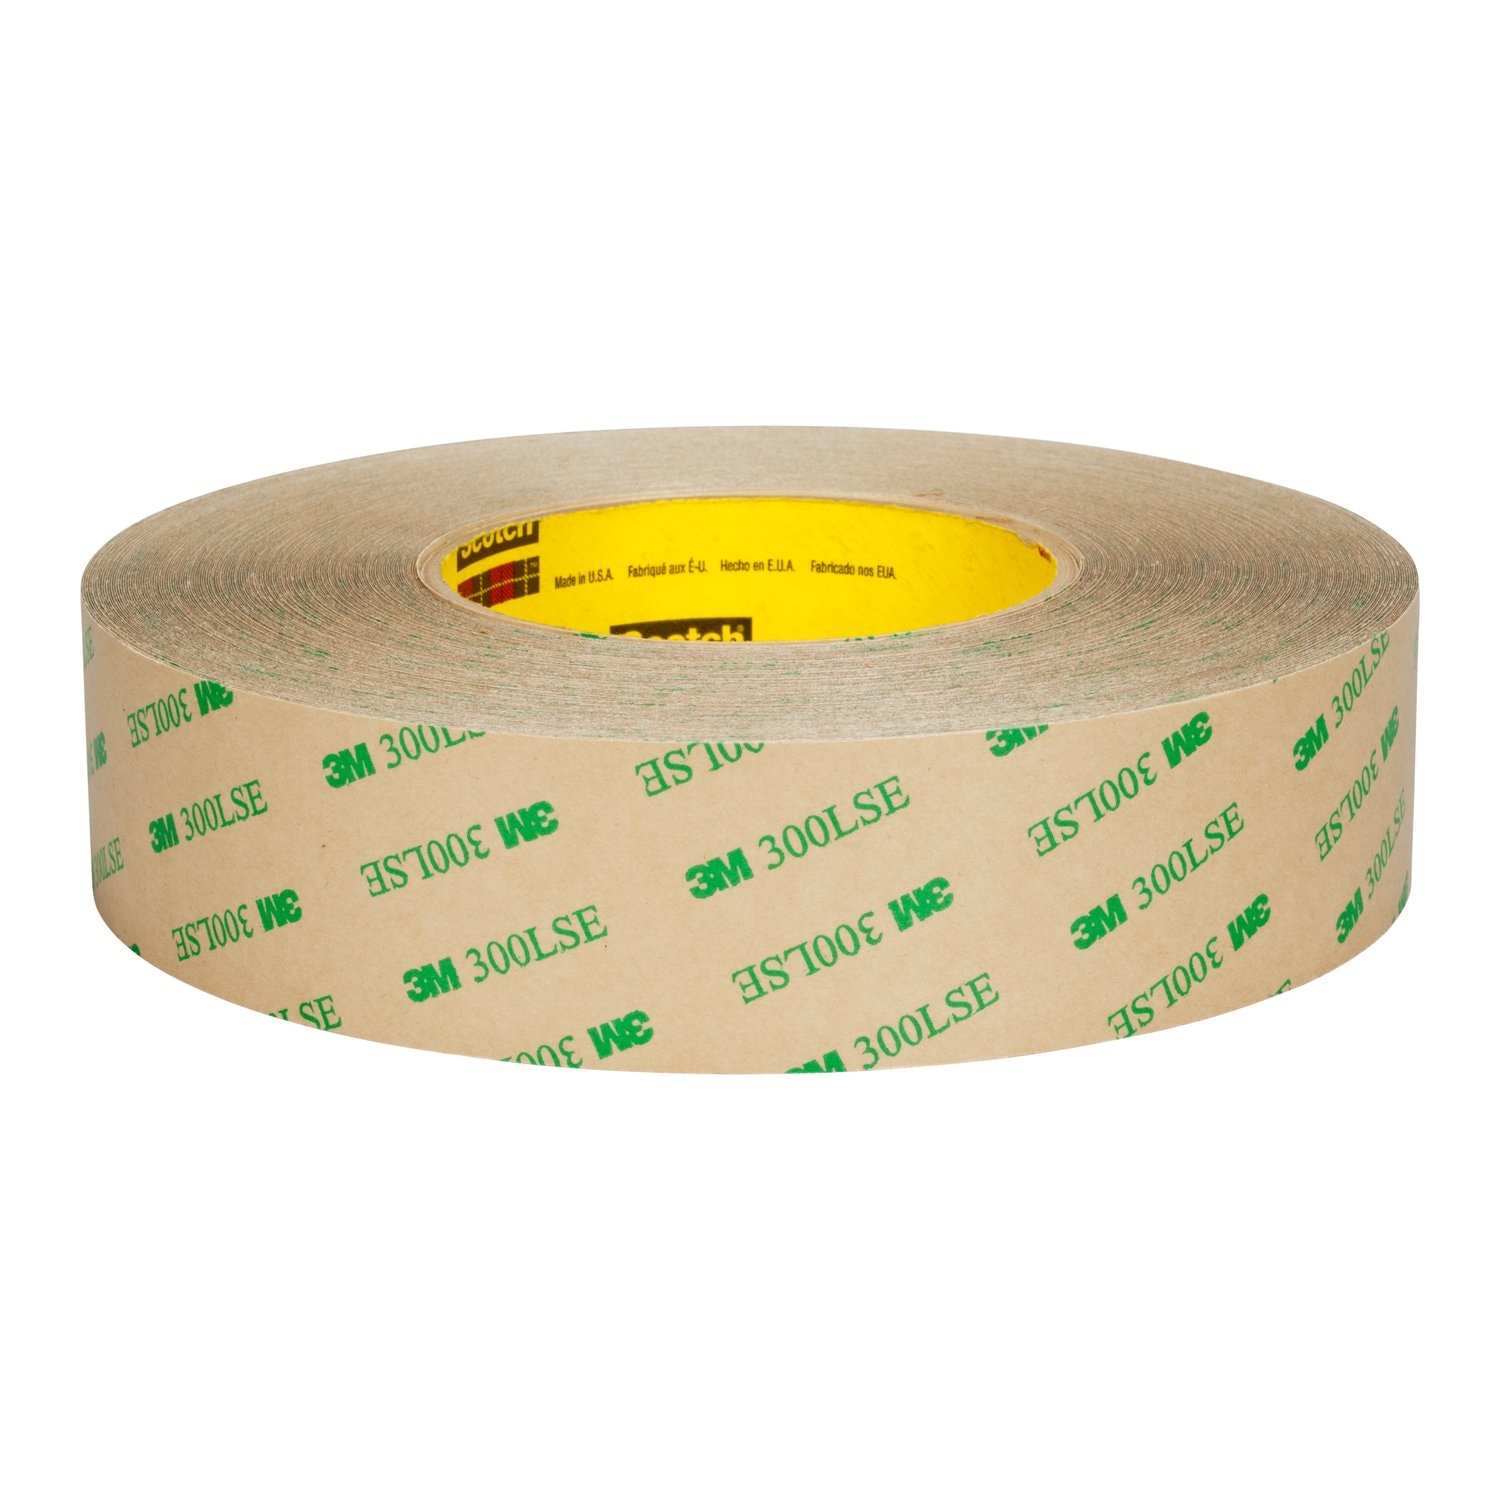 7000124934 - 3M Adhesive Transfer Tape 9672LE, Clear, 54 in x 180 yd, 5 mil, 1 roll
per case